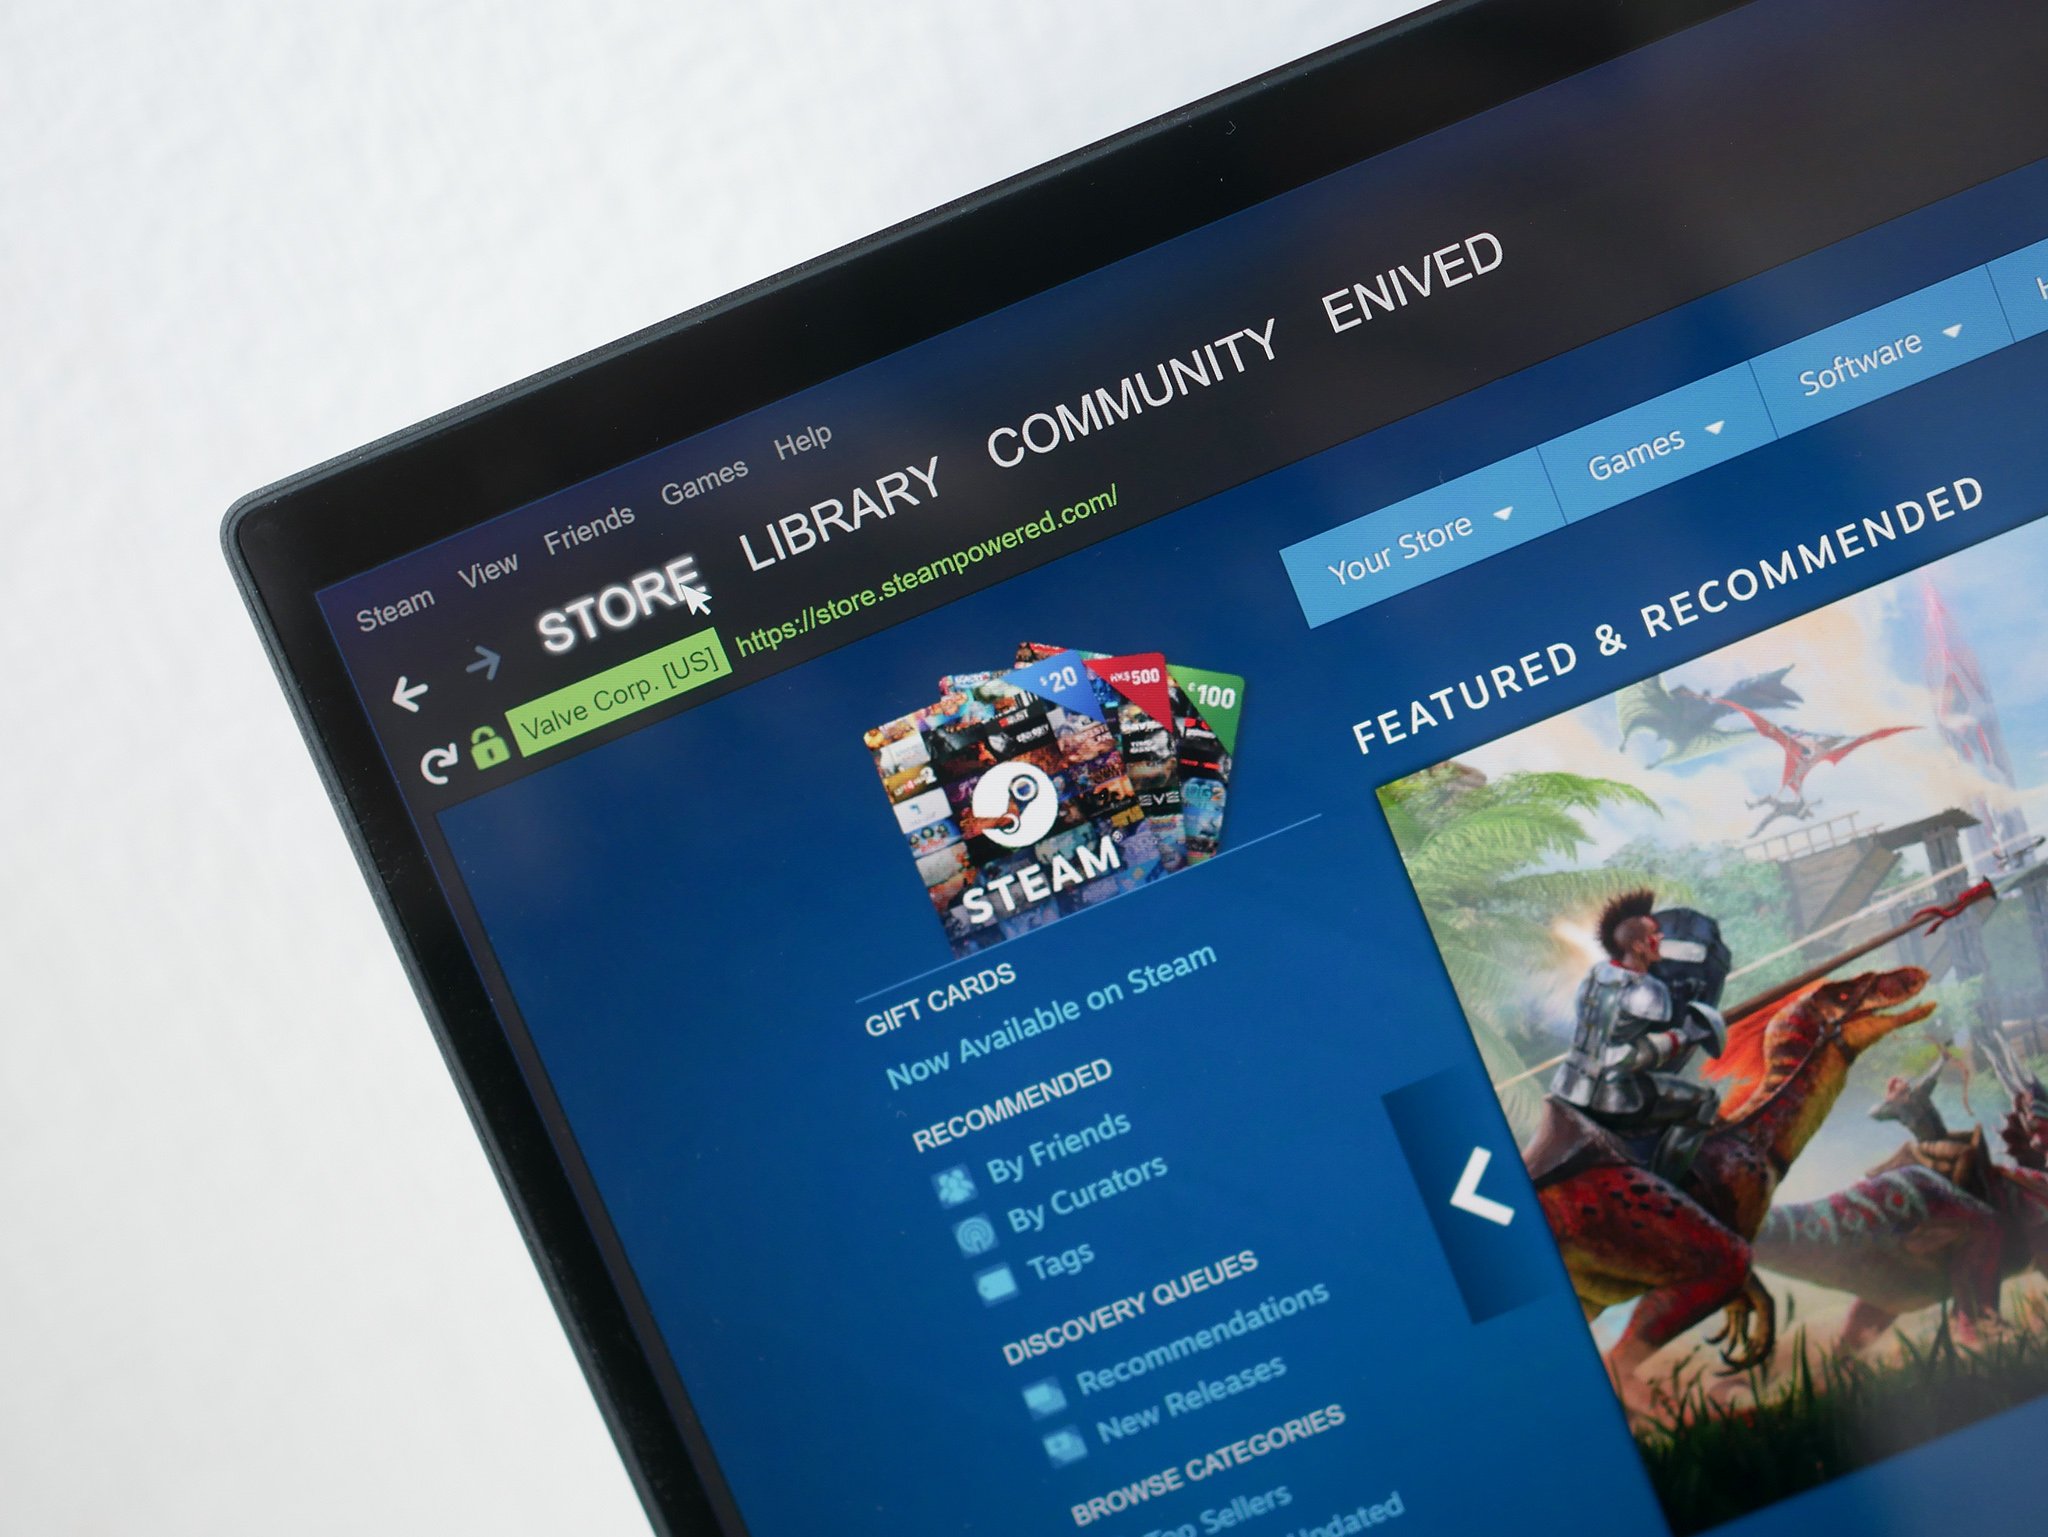 Valve adds a new way to filter for discounts during Steam sales